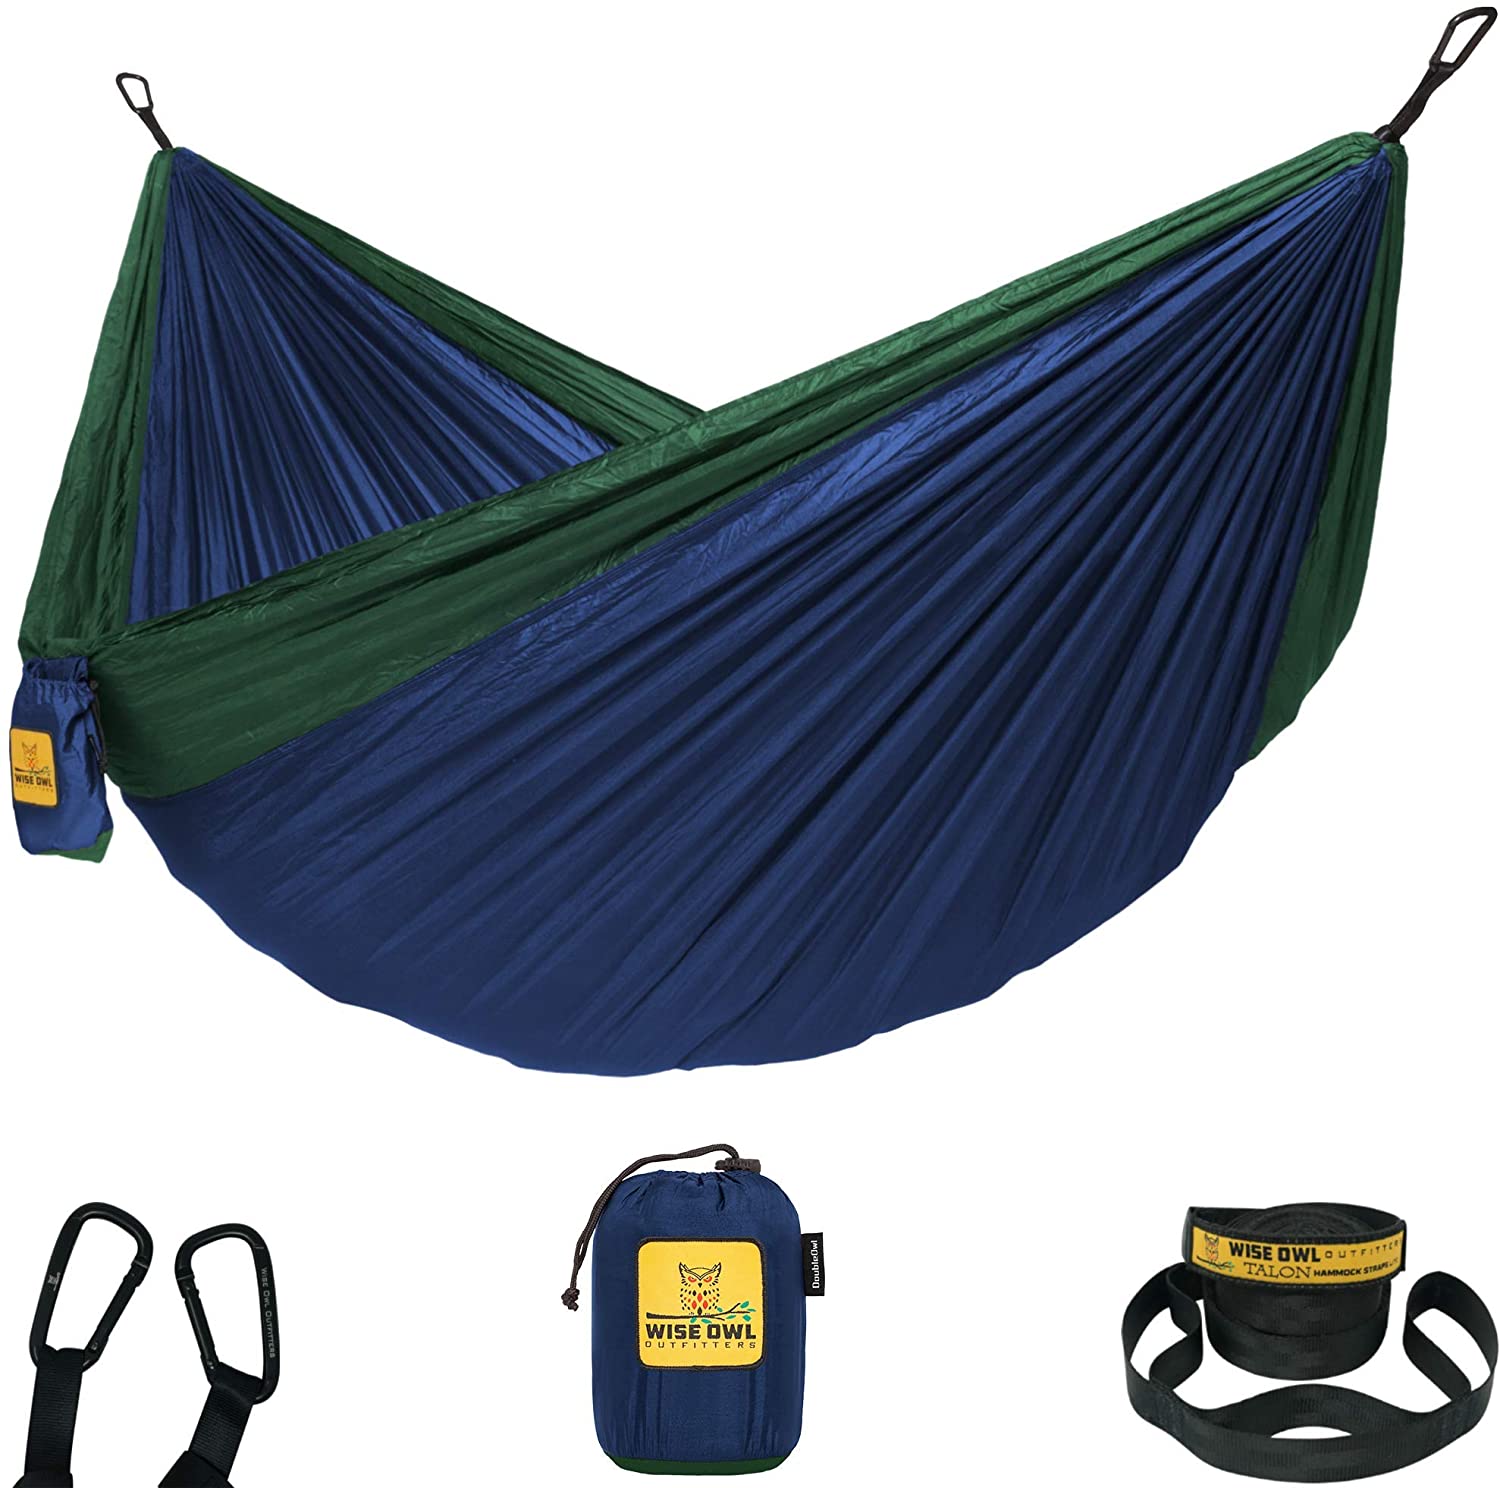 Perfect Hammock Setup for a Passionate Outdoorsy